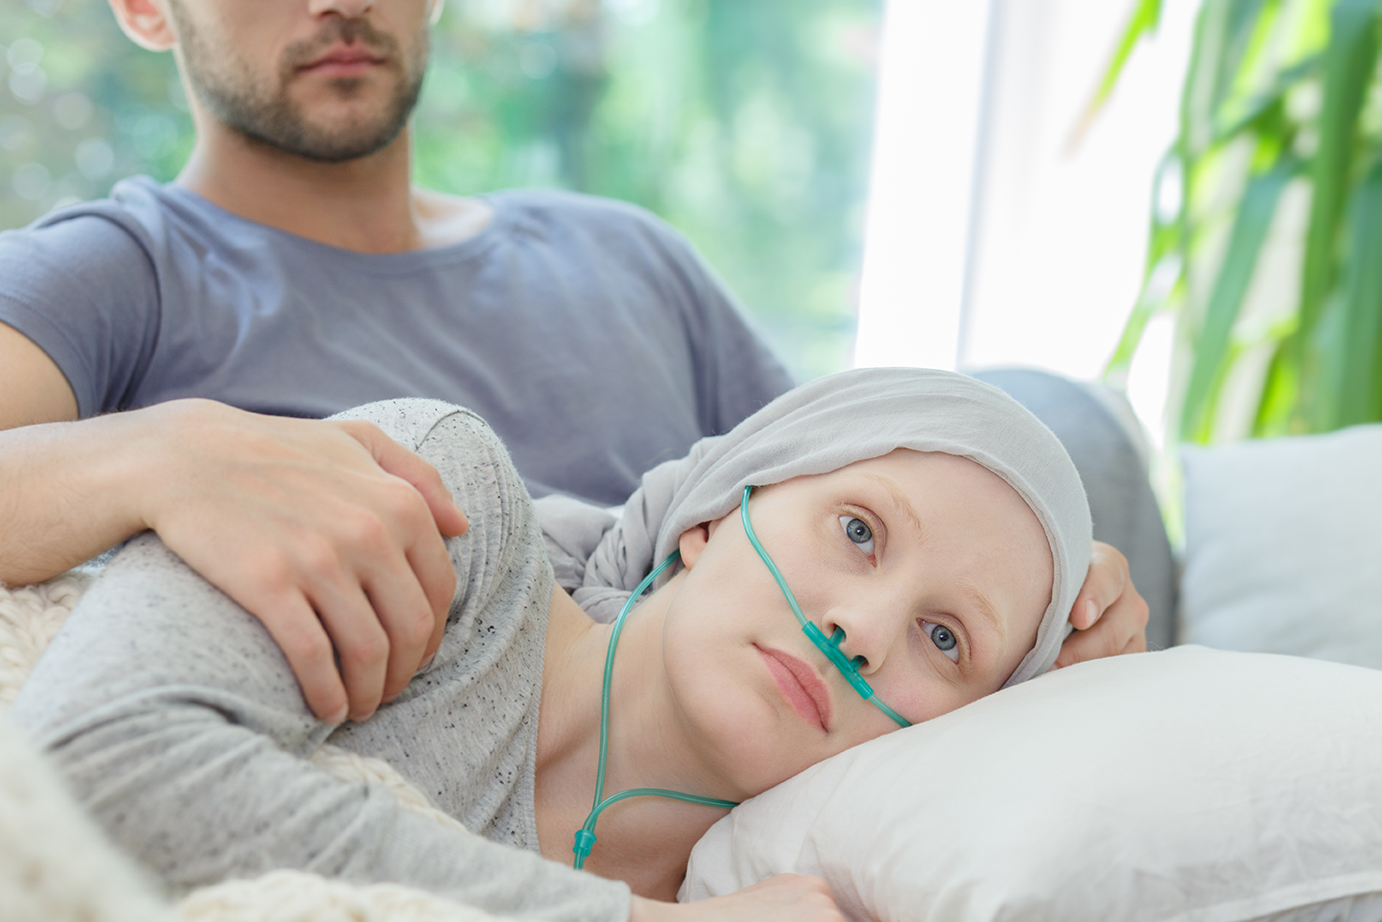 Young sad woman resting with oxygen nasal cannula on